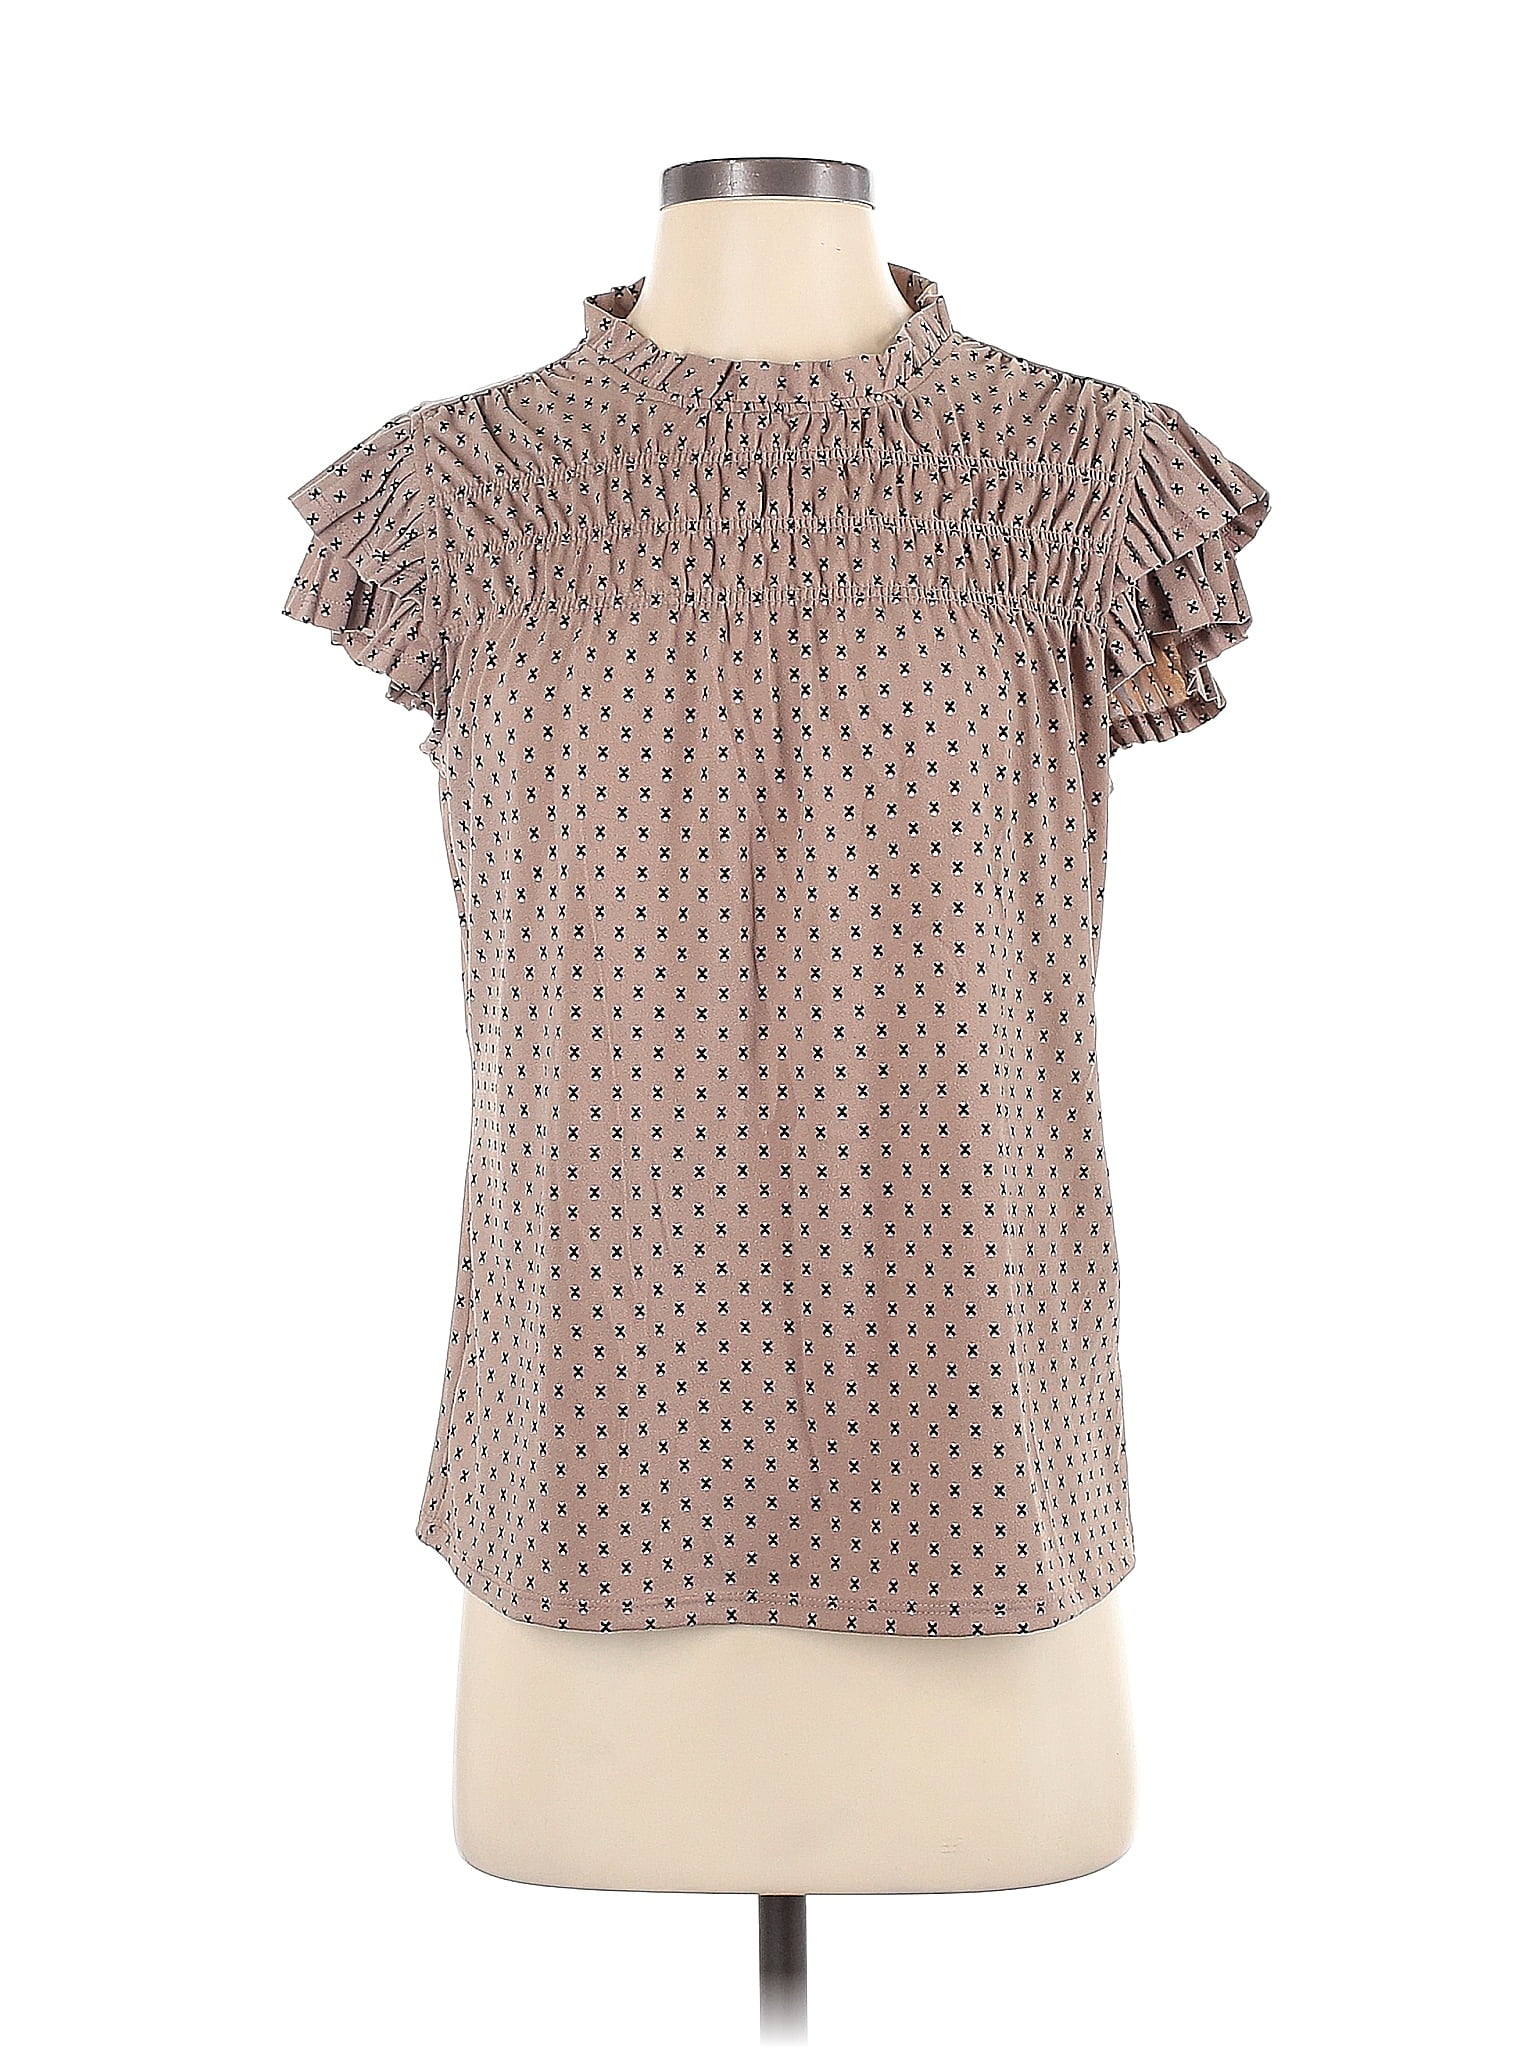 Adrianna Papell Polka Dots Tan Brown Active T-Shirt Size S - 76% off ...